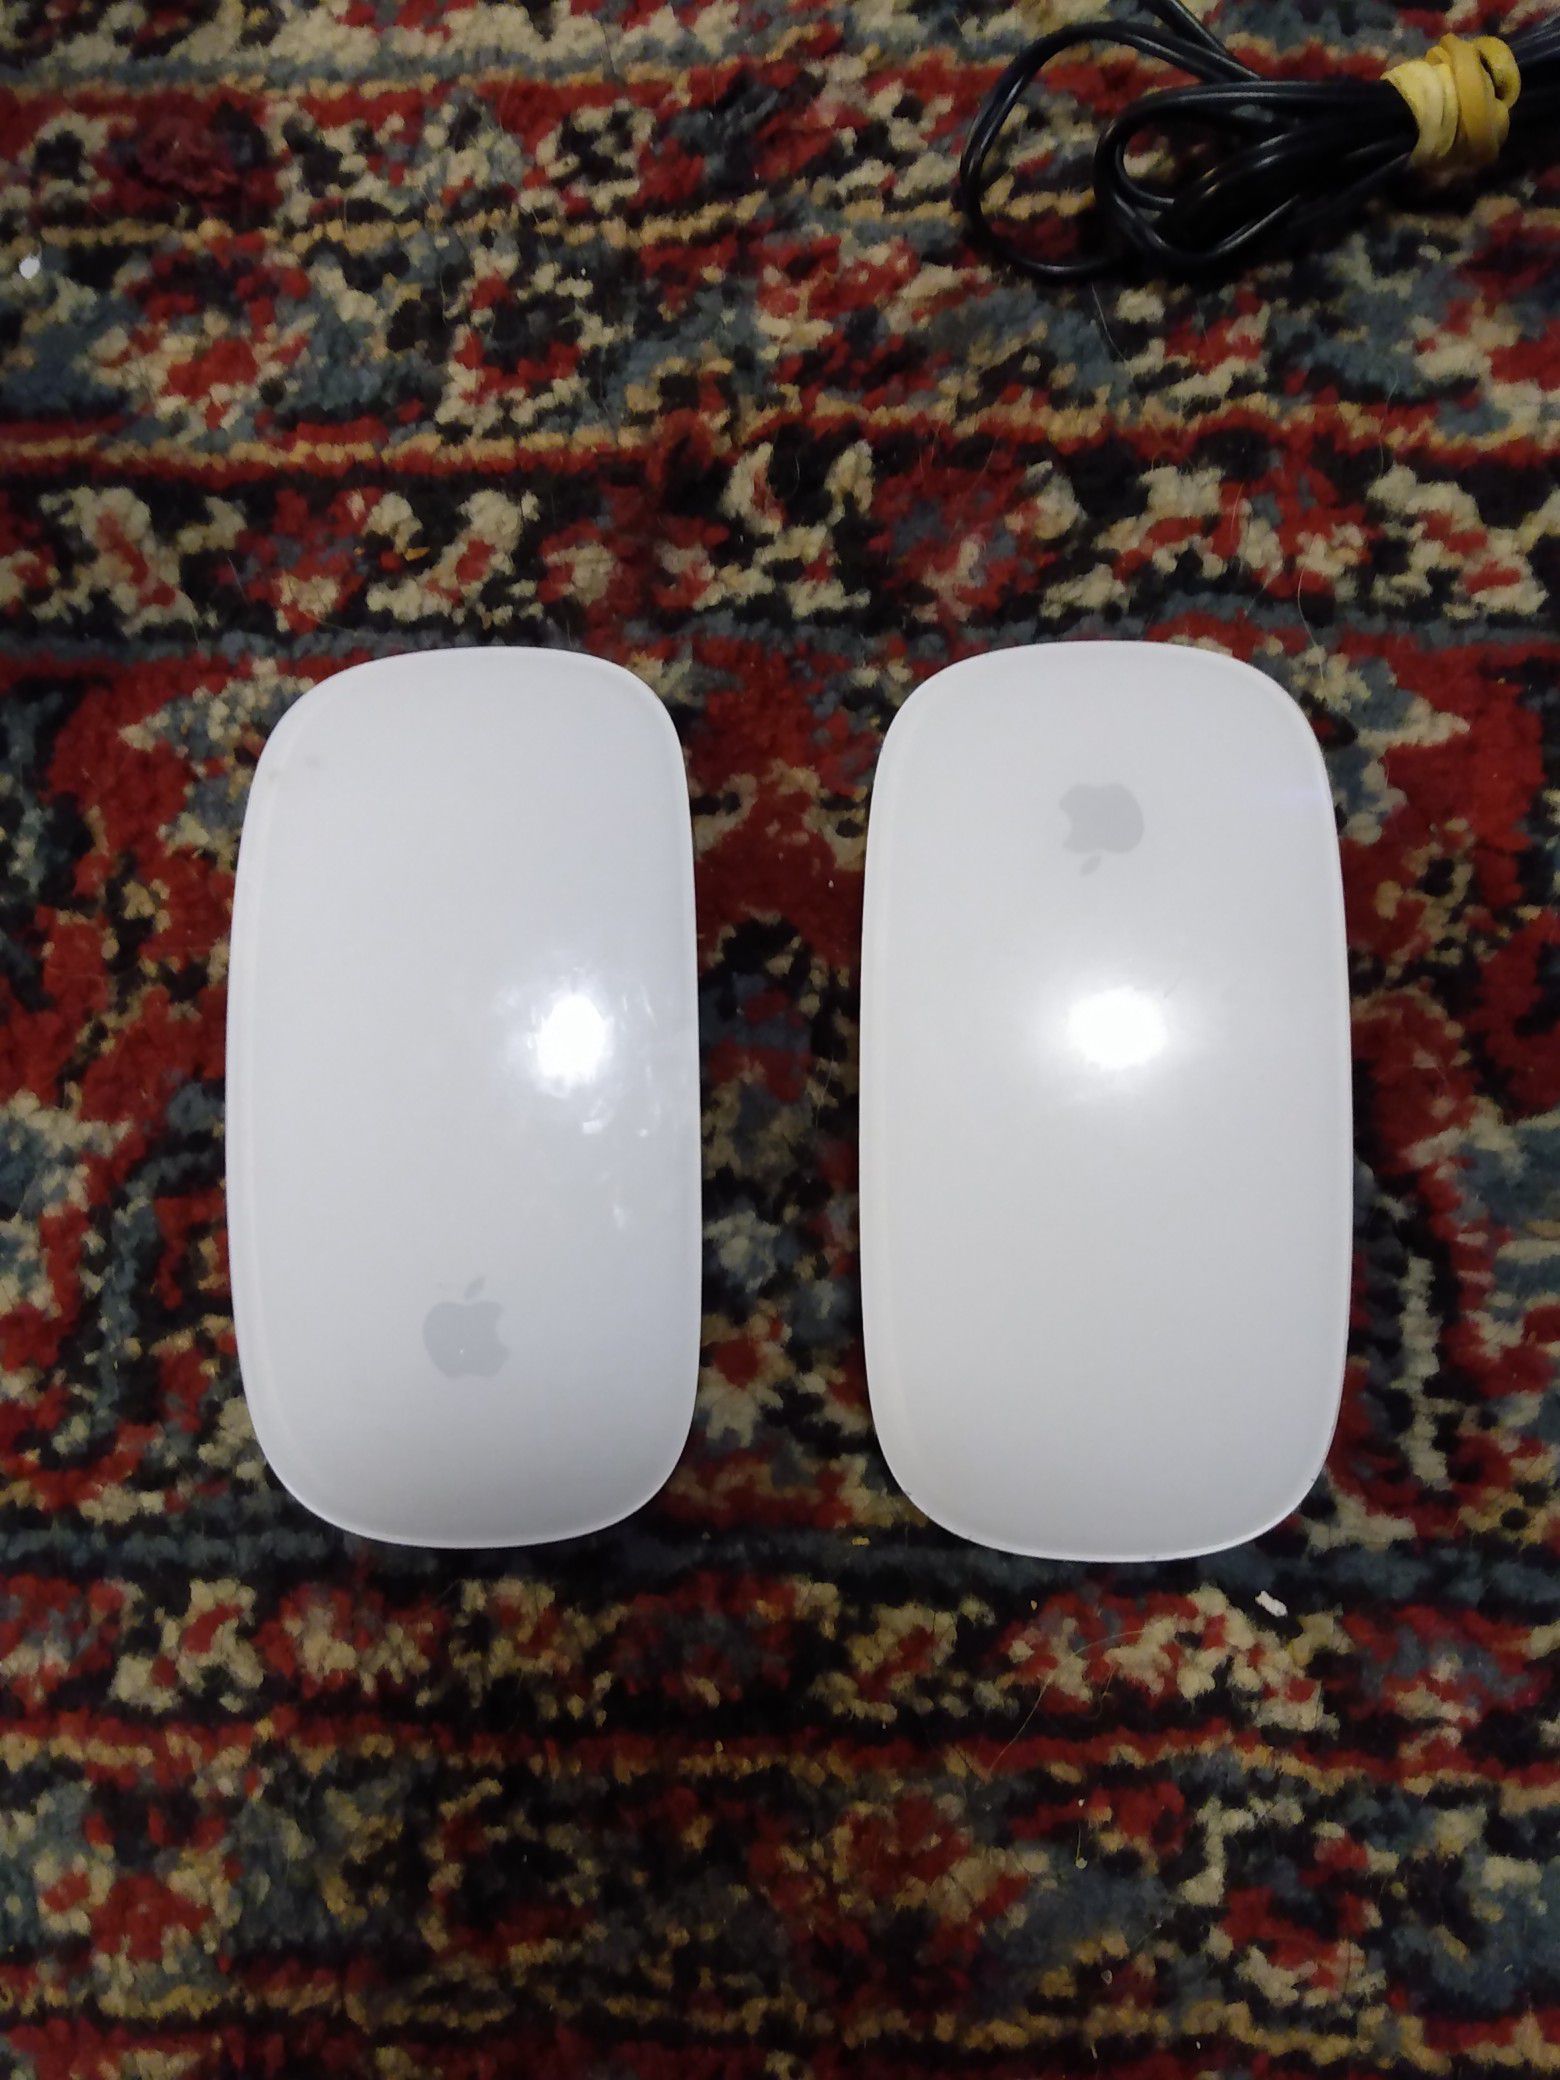 Apple wireless mouse x 2